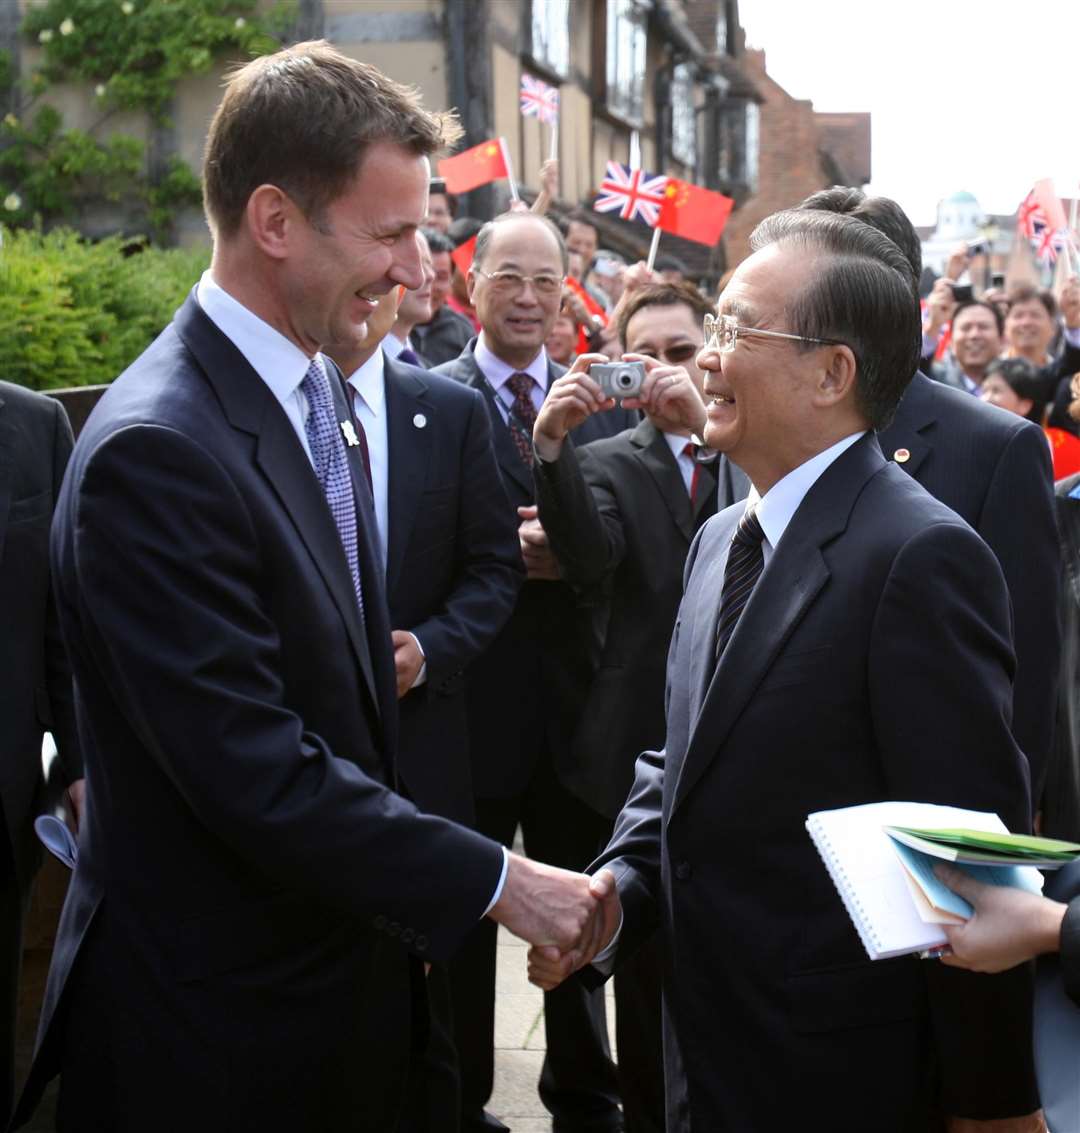 Chinese premier Wen Jiabao is greeted by Culture Secretary Jeremy Hunt at the Shakespeare Centre in Stratford-upon-Avon in June 2011 (Chris Radburn/PA)